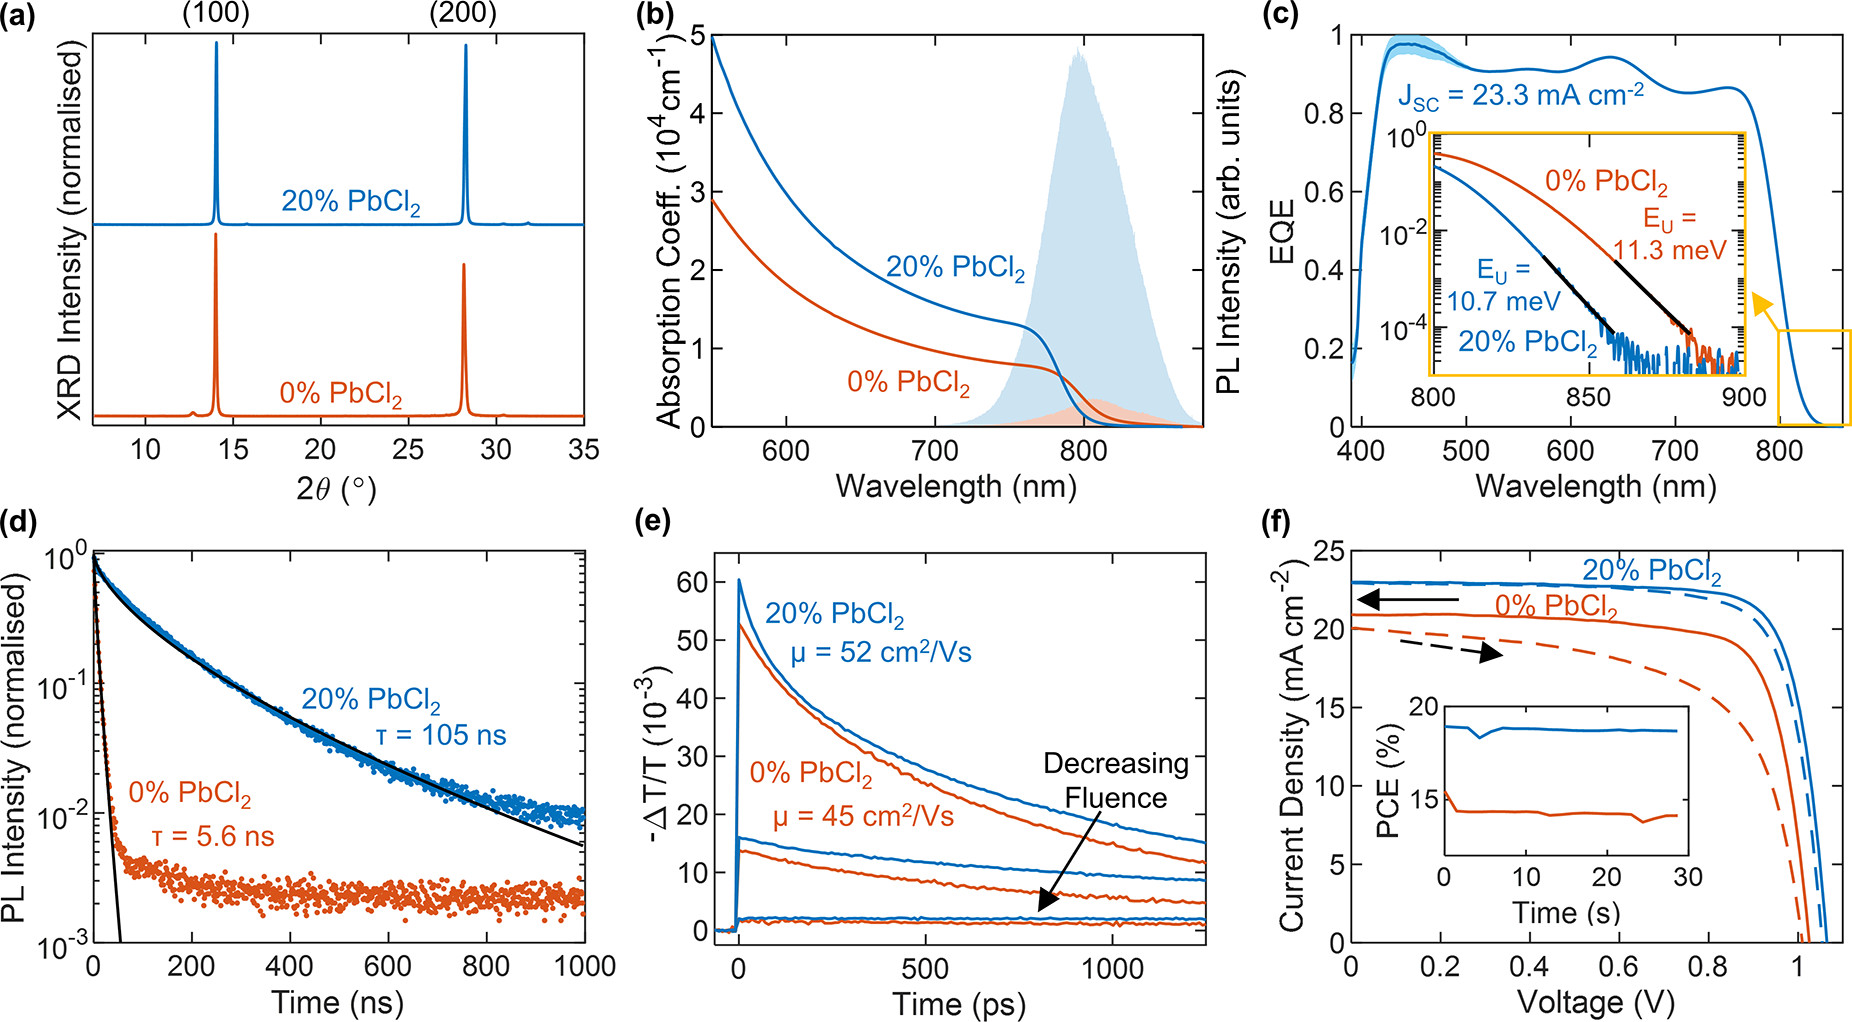 PbCl2 substitution improves device performance. (a) X-ray diffraction (XRD) patterns of FA1–yCsyPb(I1–xClx)3 full photovoltaic devices after testing, grown with (blue line) and without (red line) PbI2 substituted for PbCl2, as denoted in the figure. The XRD patterns were acquired with a Cu–Ka 1.54 Å X-ray source, corrected for specimen displacement, and normalized. (b) Absorption coefficient of bare thin films of the aforementioned composition on z-cut quartz. The shaded region shows the unnormalized PL after photoexcitation at 470 nm. (c) External quantum efficiency (EQE) of a device with 20% PbCl2 and the corresponding integrated short-circuit current (JSC). The inset shows the absorption edge from the EQE and the Urbach tail fit (black line). (d) Time-resolved photoluminescence (PL) traces for thin films of the aforementioned bare films on quartz, after photoexcitation by a 1 MHz pulsed 470 nm laser at a fluence of 20 µJ/cm2. The black line shows a stretched exponential fit. (e) Optical-pump THz-probe (OPTP) photoconductivity transients of the aforementioned bare films on quartz after photoexcitation at 400 nm as a function of fluence (1.0, 10, 42 µJ/cm2). (f) Current–voltage (J–V) measurements of the aforementioned photovoltaic devices under AM1.5 illumination, as measured under reverse bias (solid line) and forward bias (dashed line). The inset shows the power conversion efficiency (PCE) measured at the max power point under continuous illumination over 30 s.